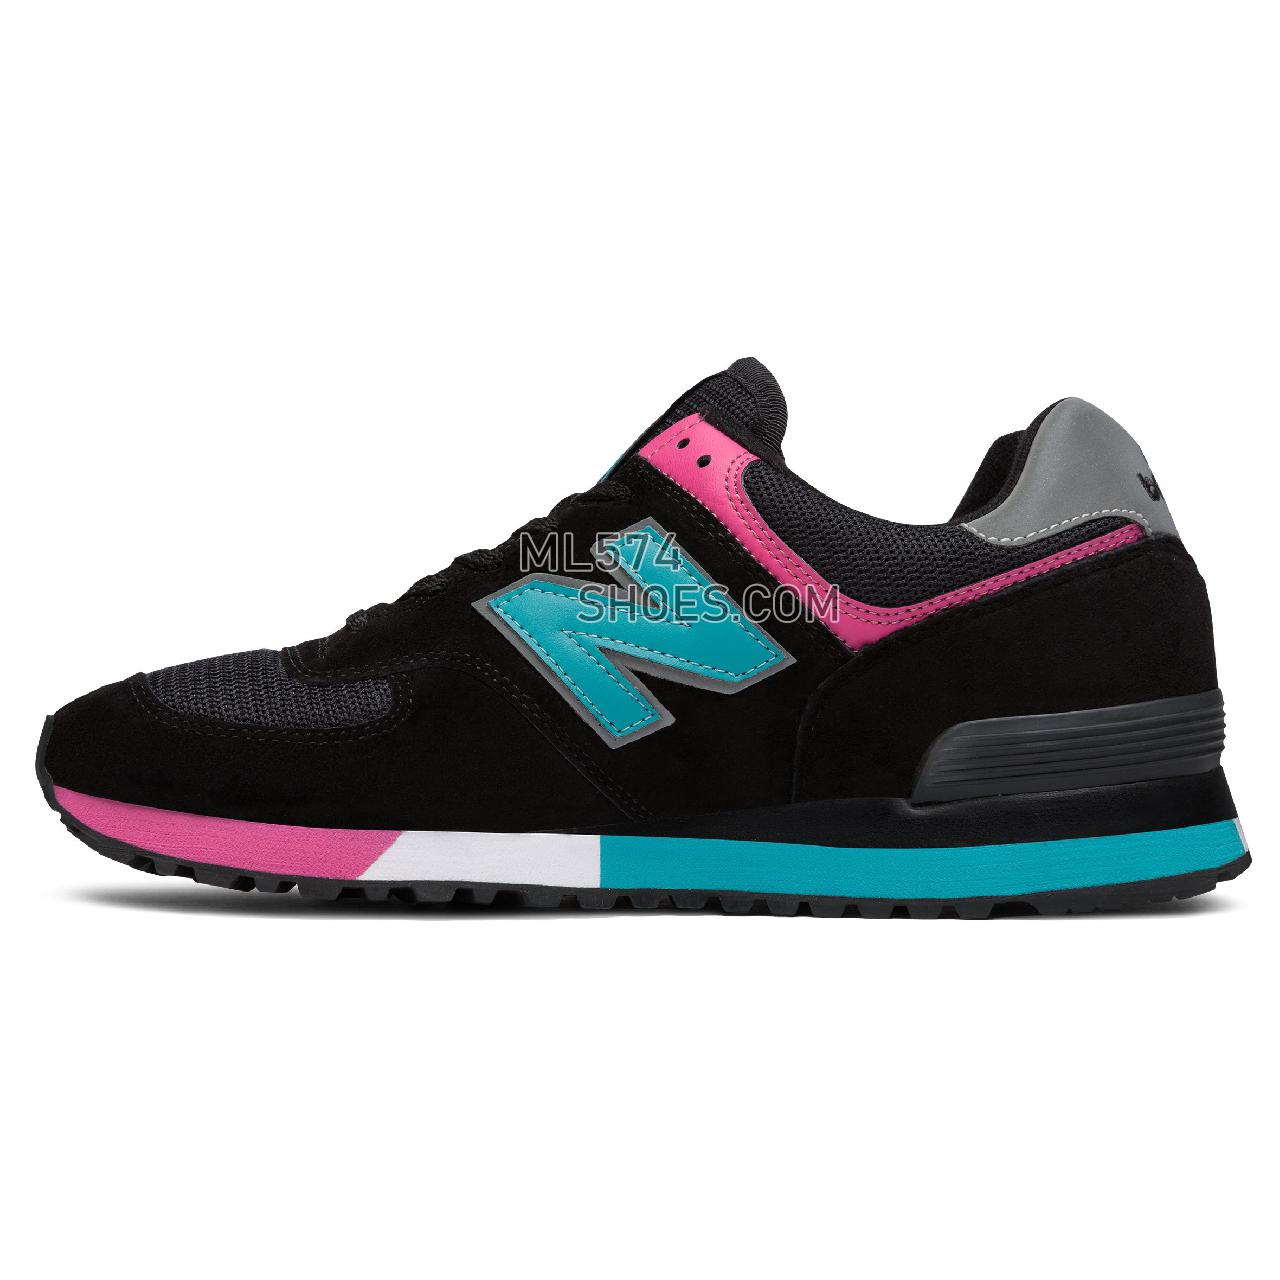 New Balance 576 Made in UK - Men's 576 - Classic Black with Lake Blue - OM576BTP